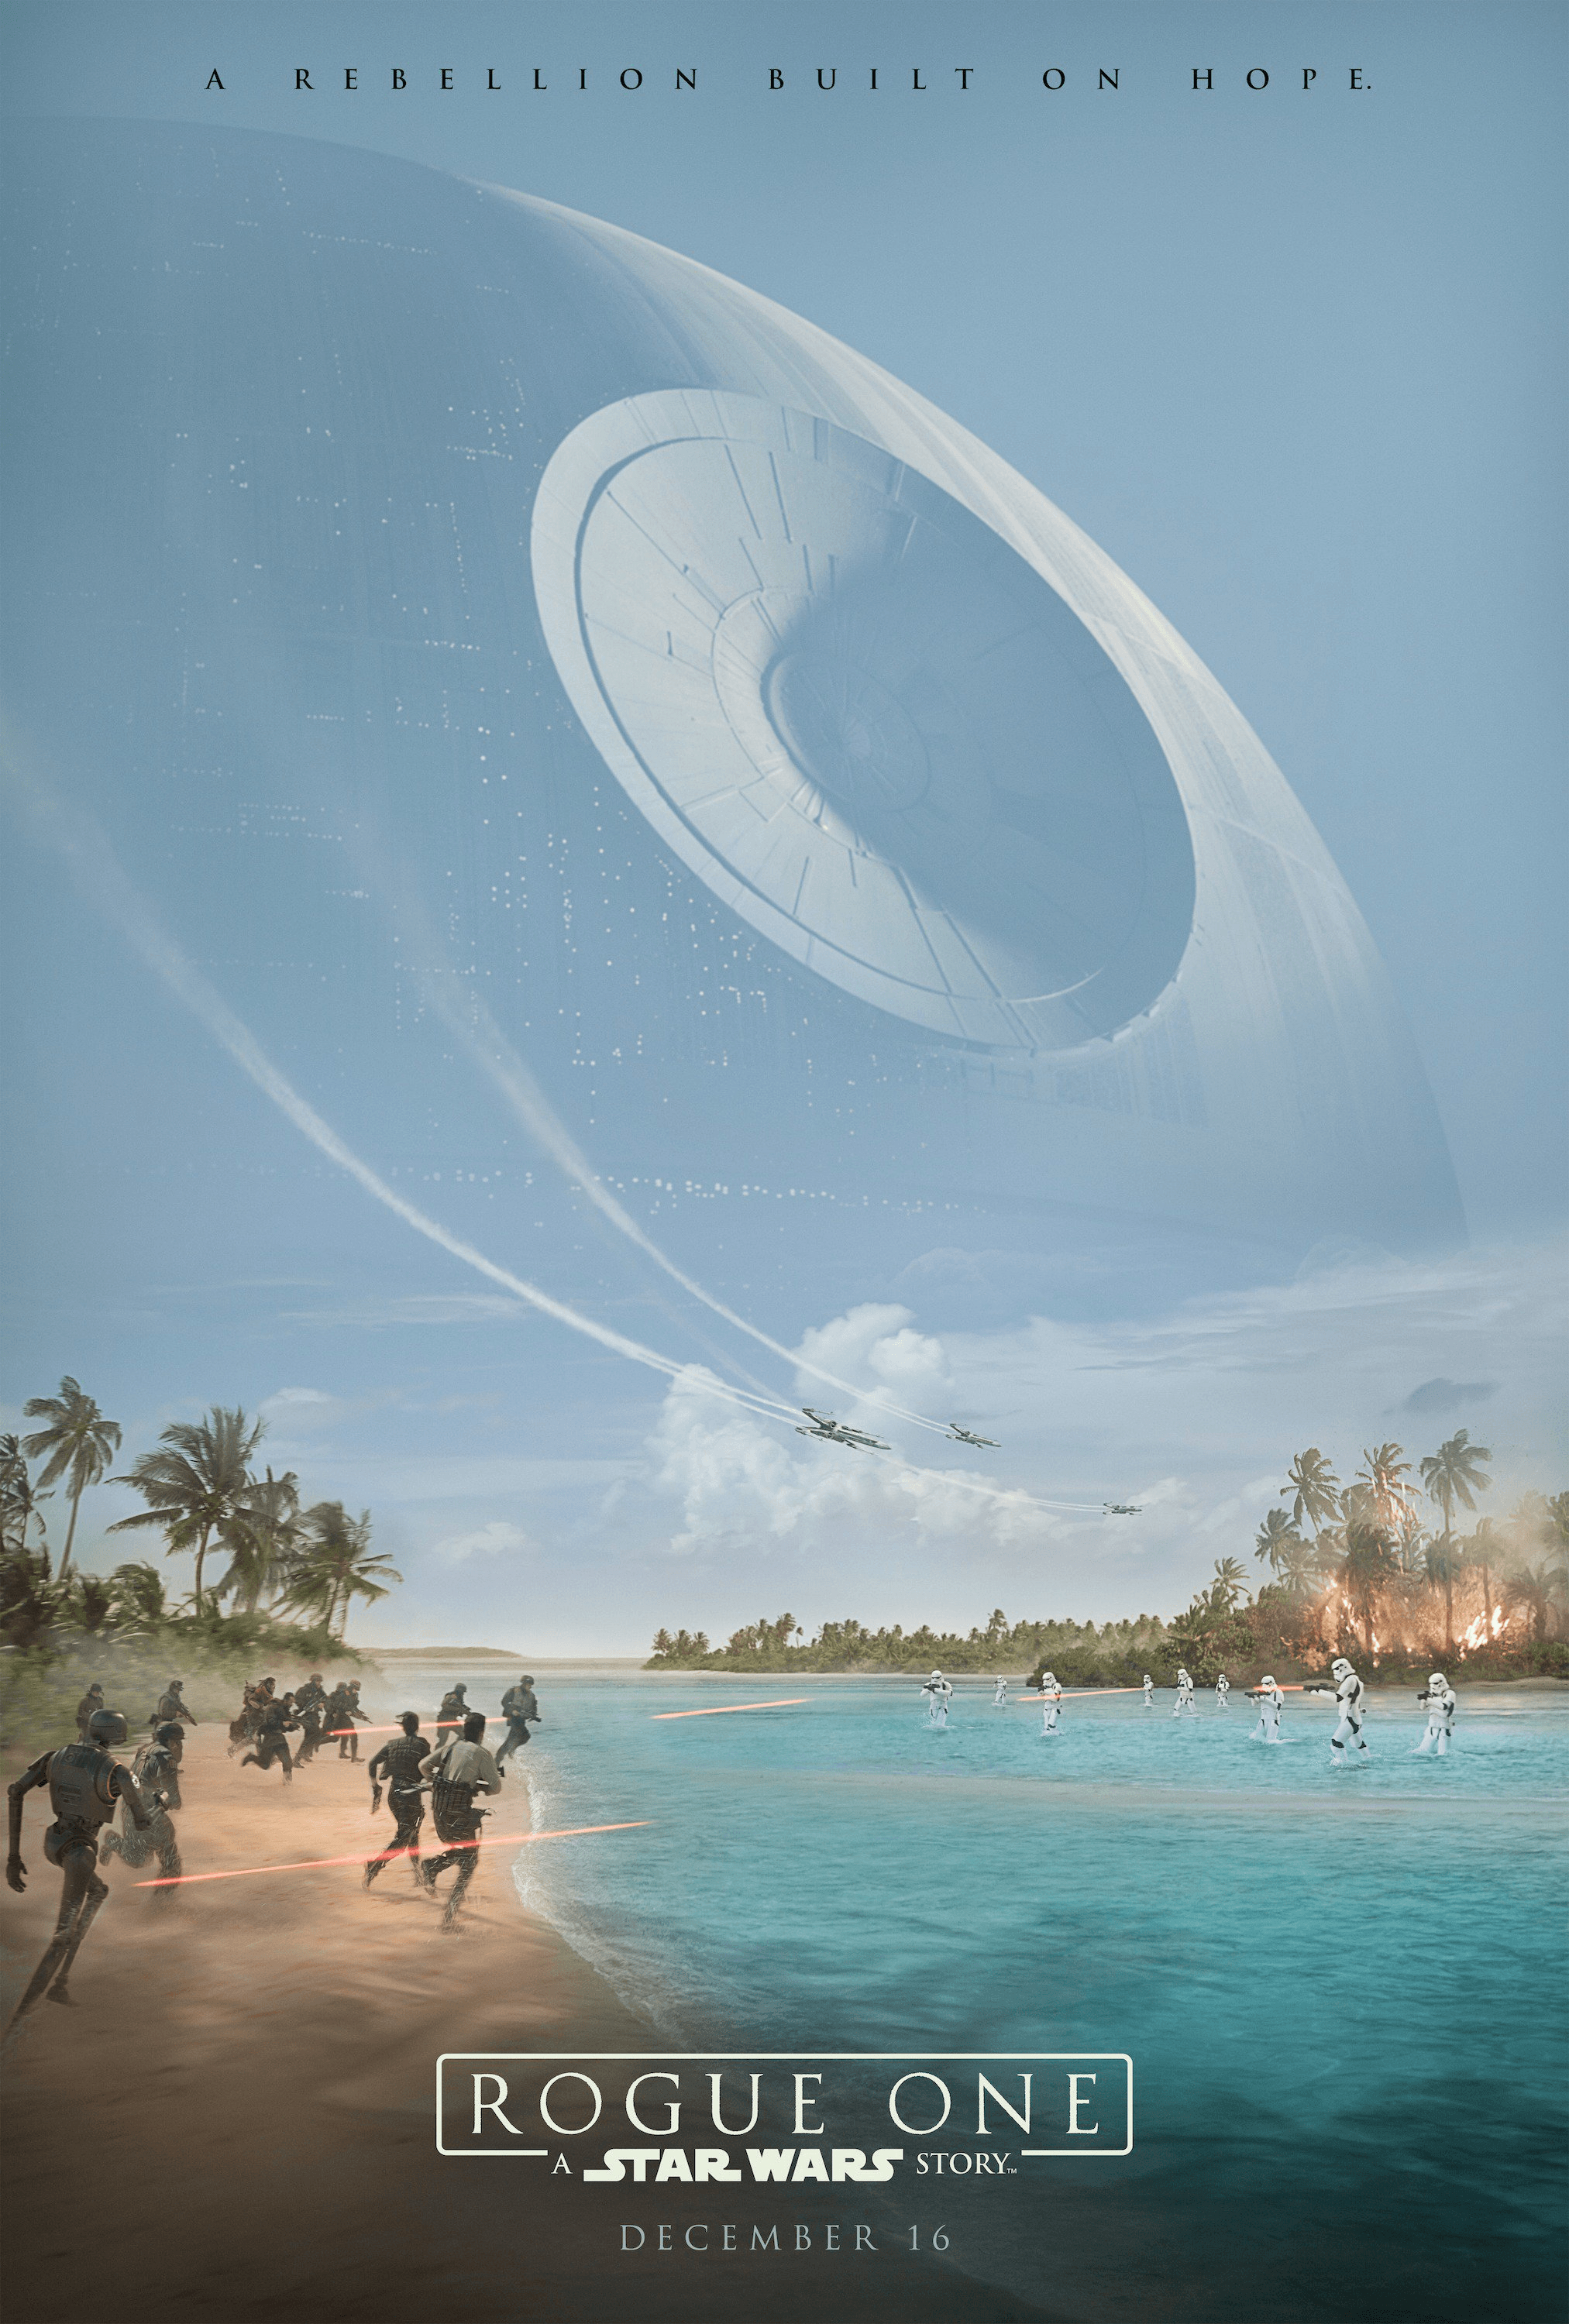 Rogue One A Star Wars Story Poster 2016 wallpaper HD 2016 in Star